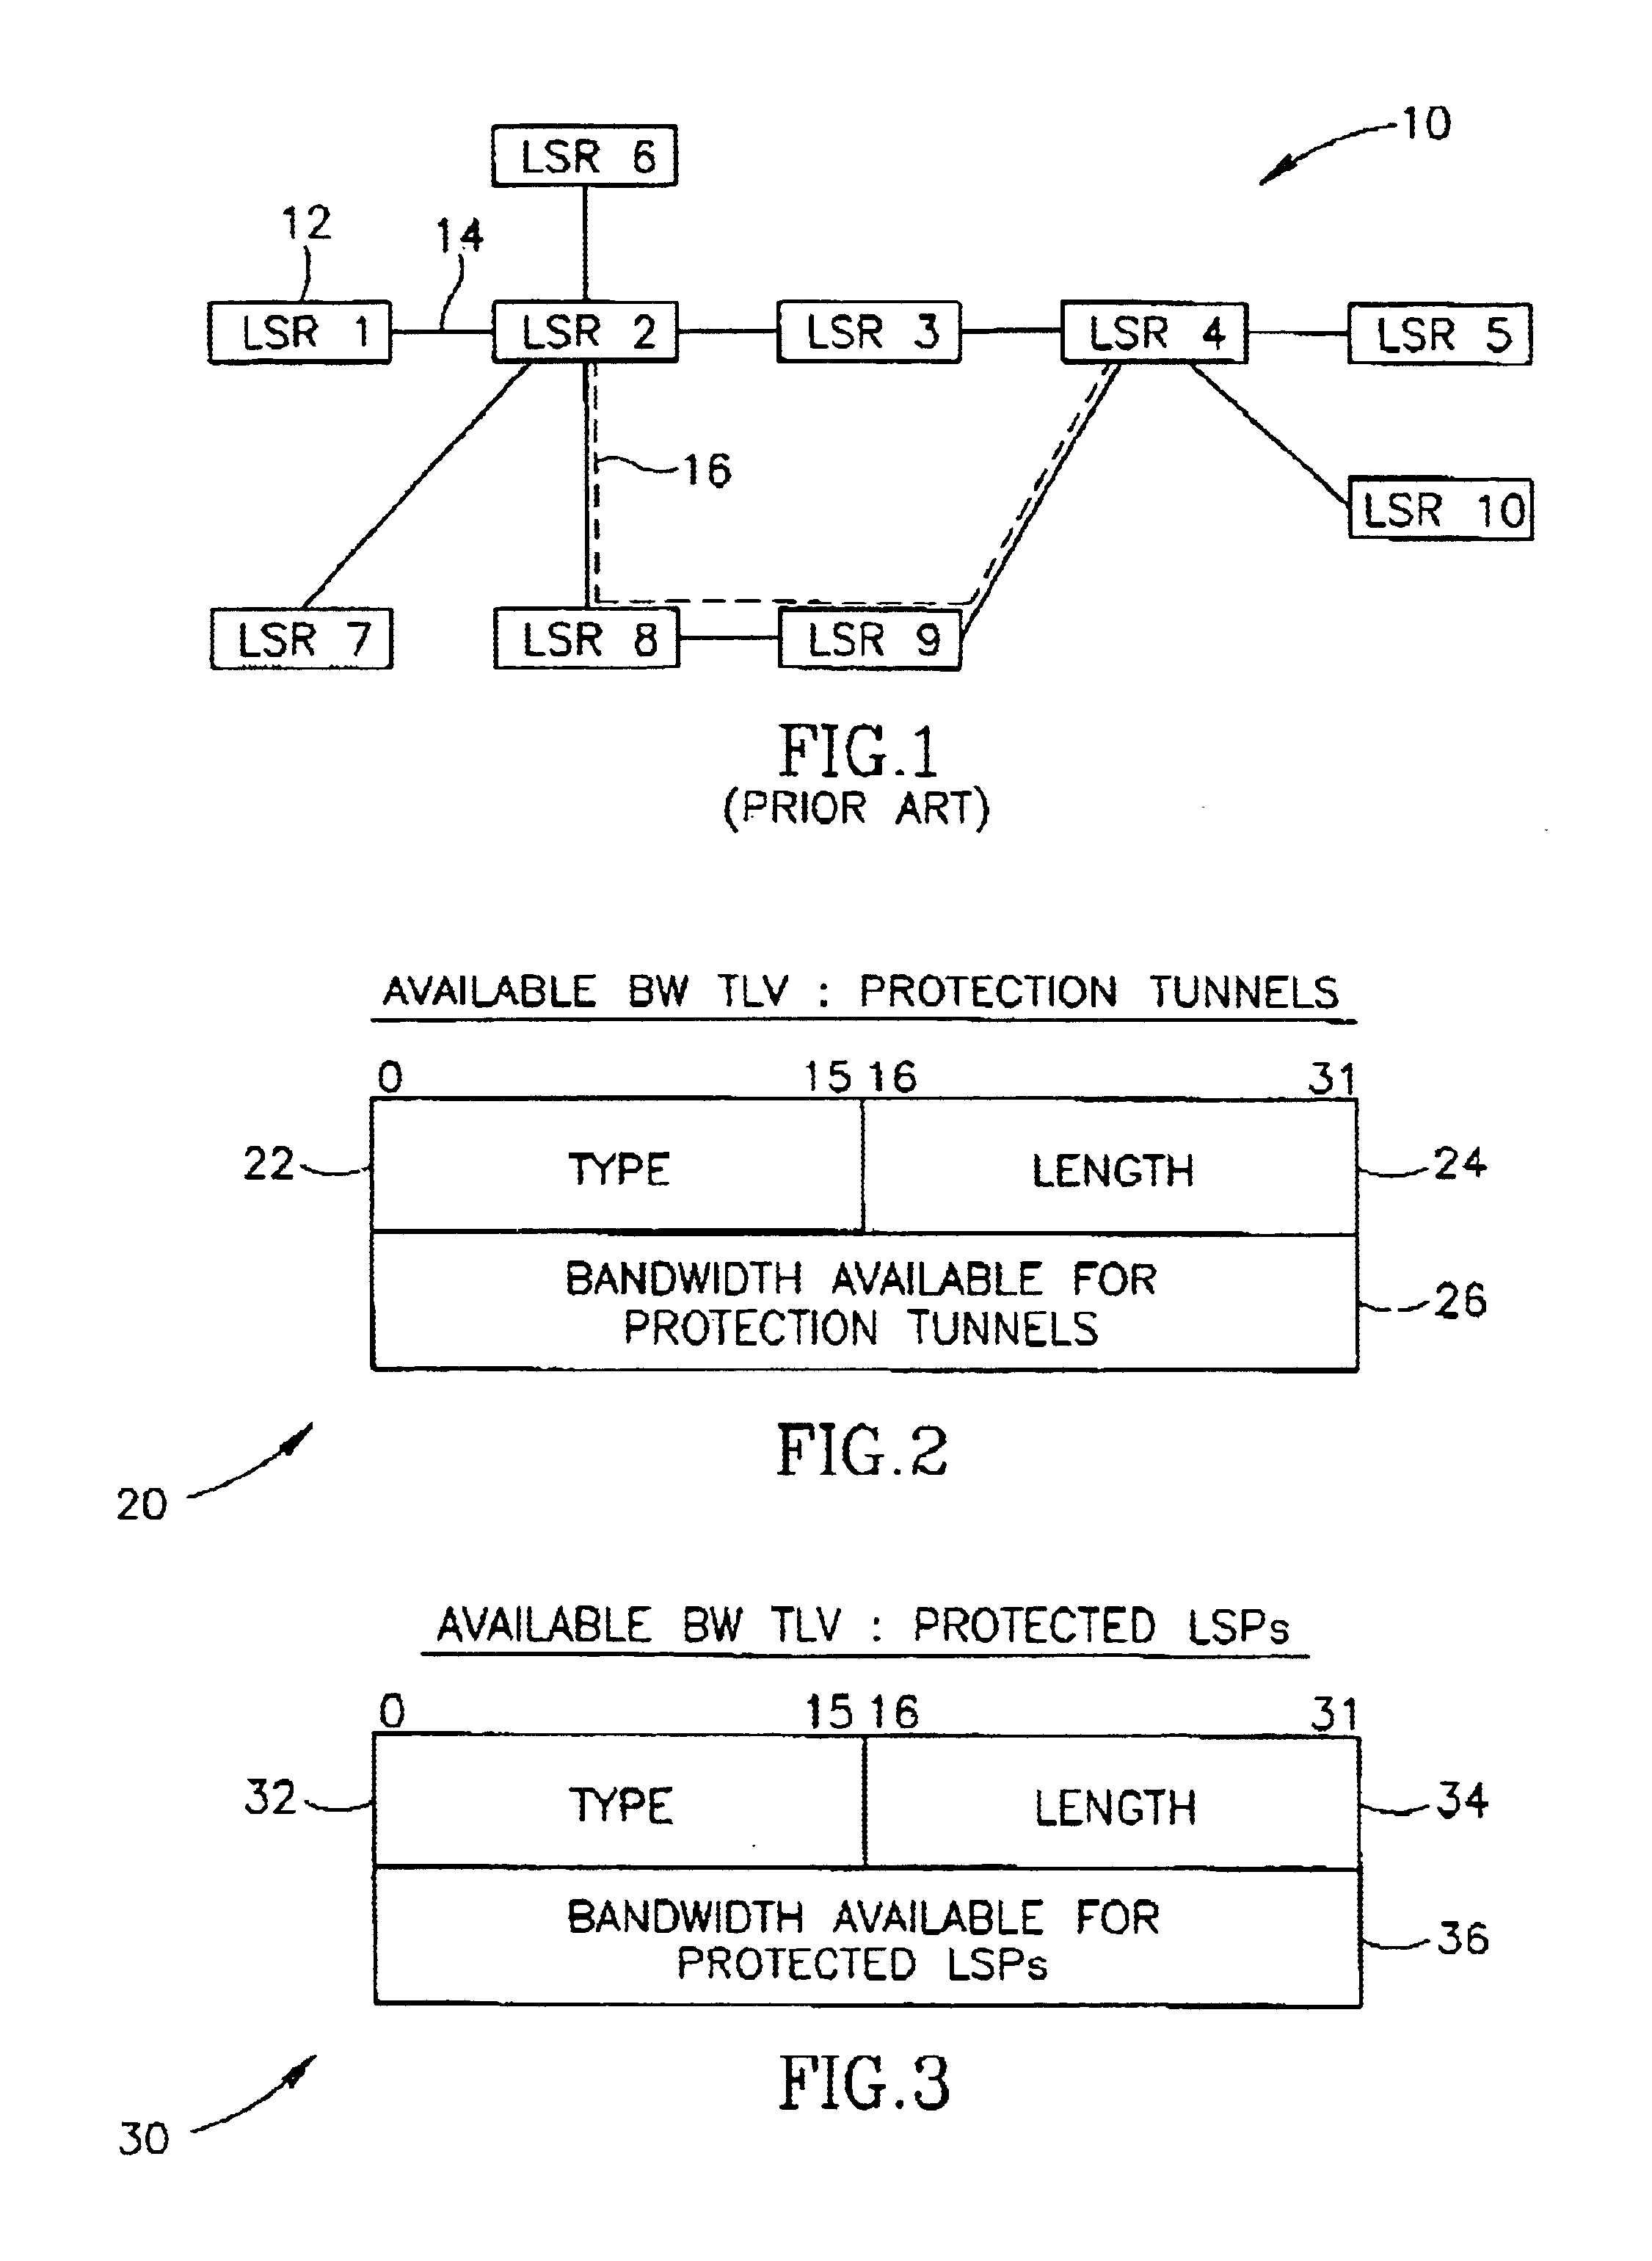 Path rerouting mechanism utilizing multiple link bandwidth allocations